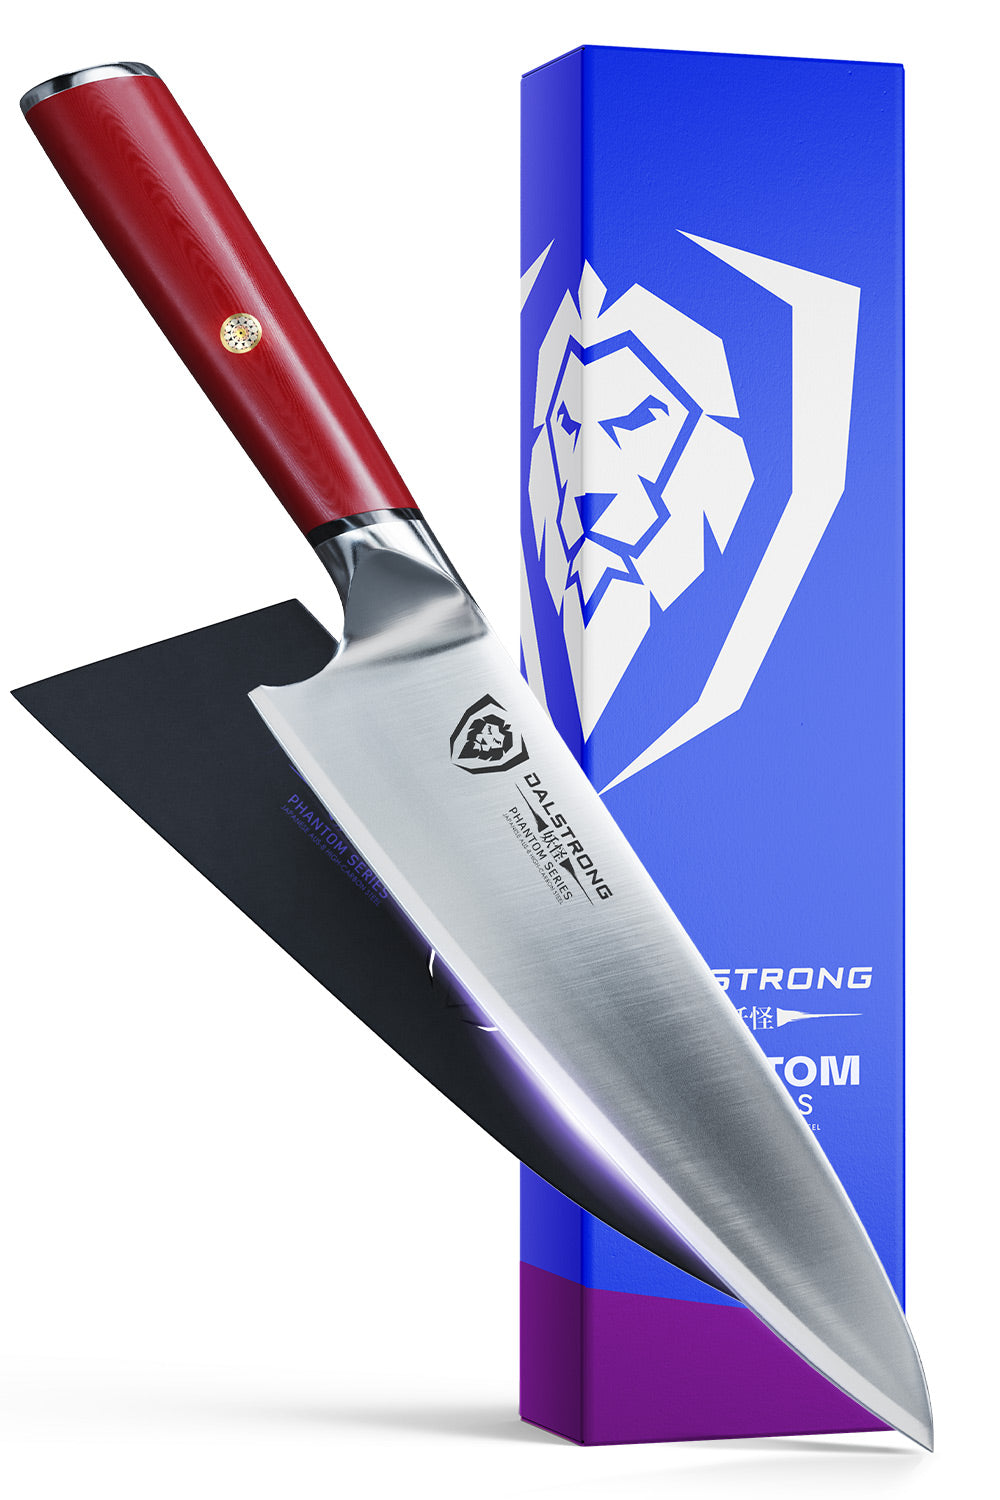 Chef's Knife 8" | Red G10 Handle | Phantom Series | Dalstrong ©